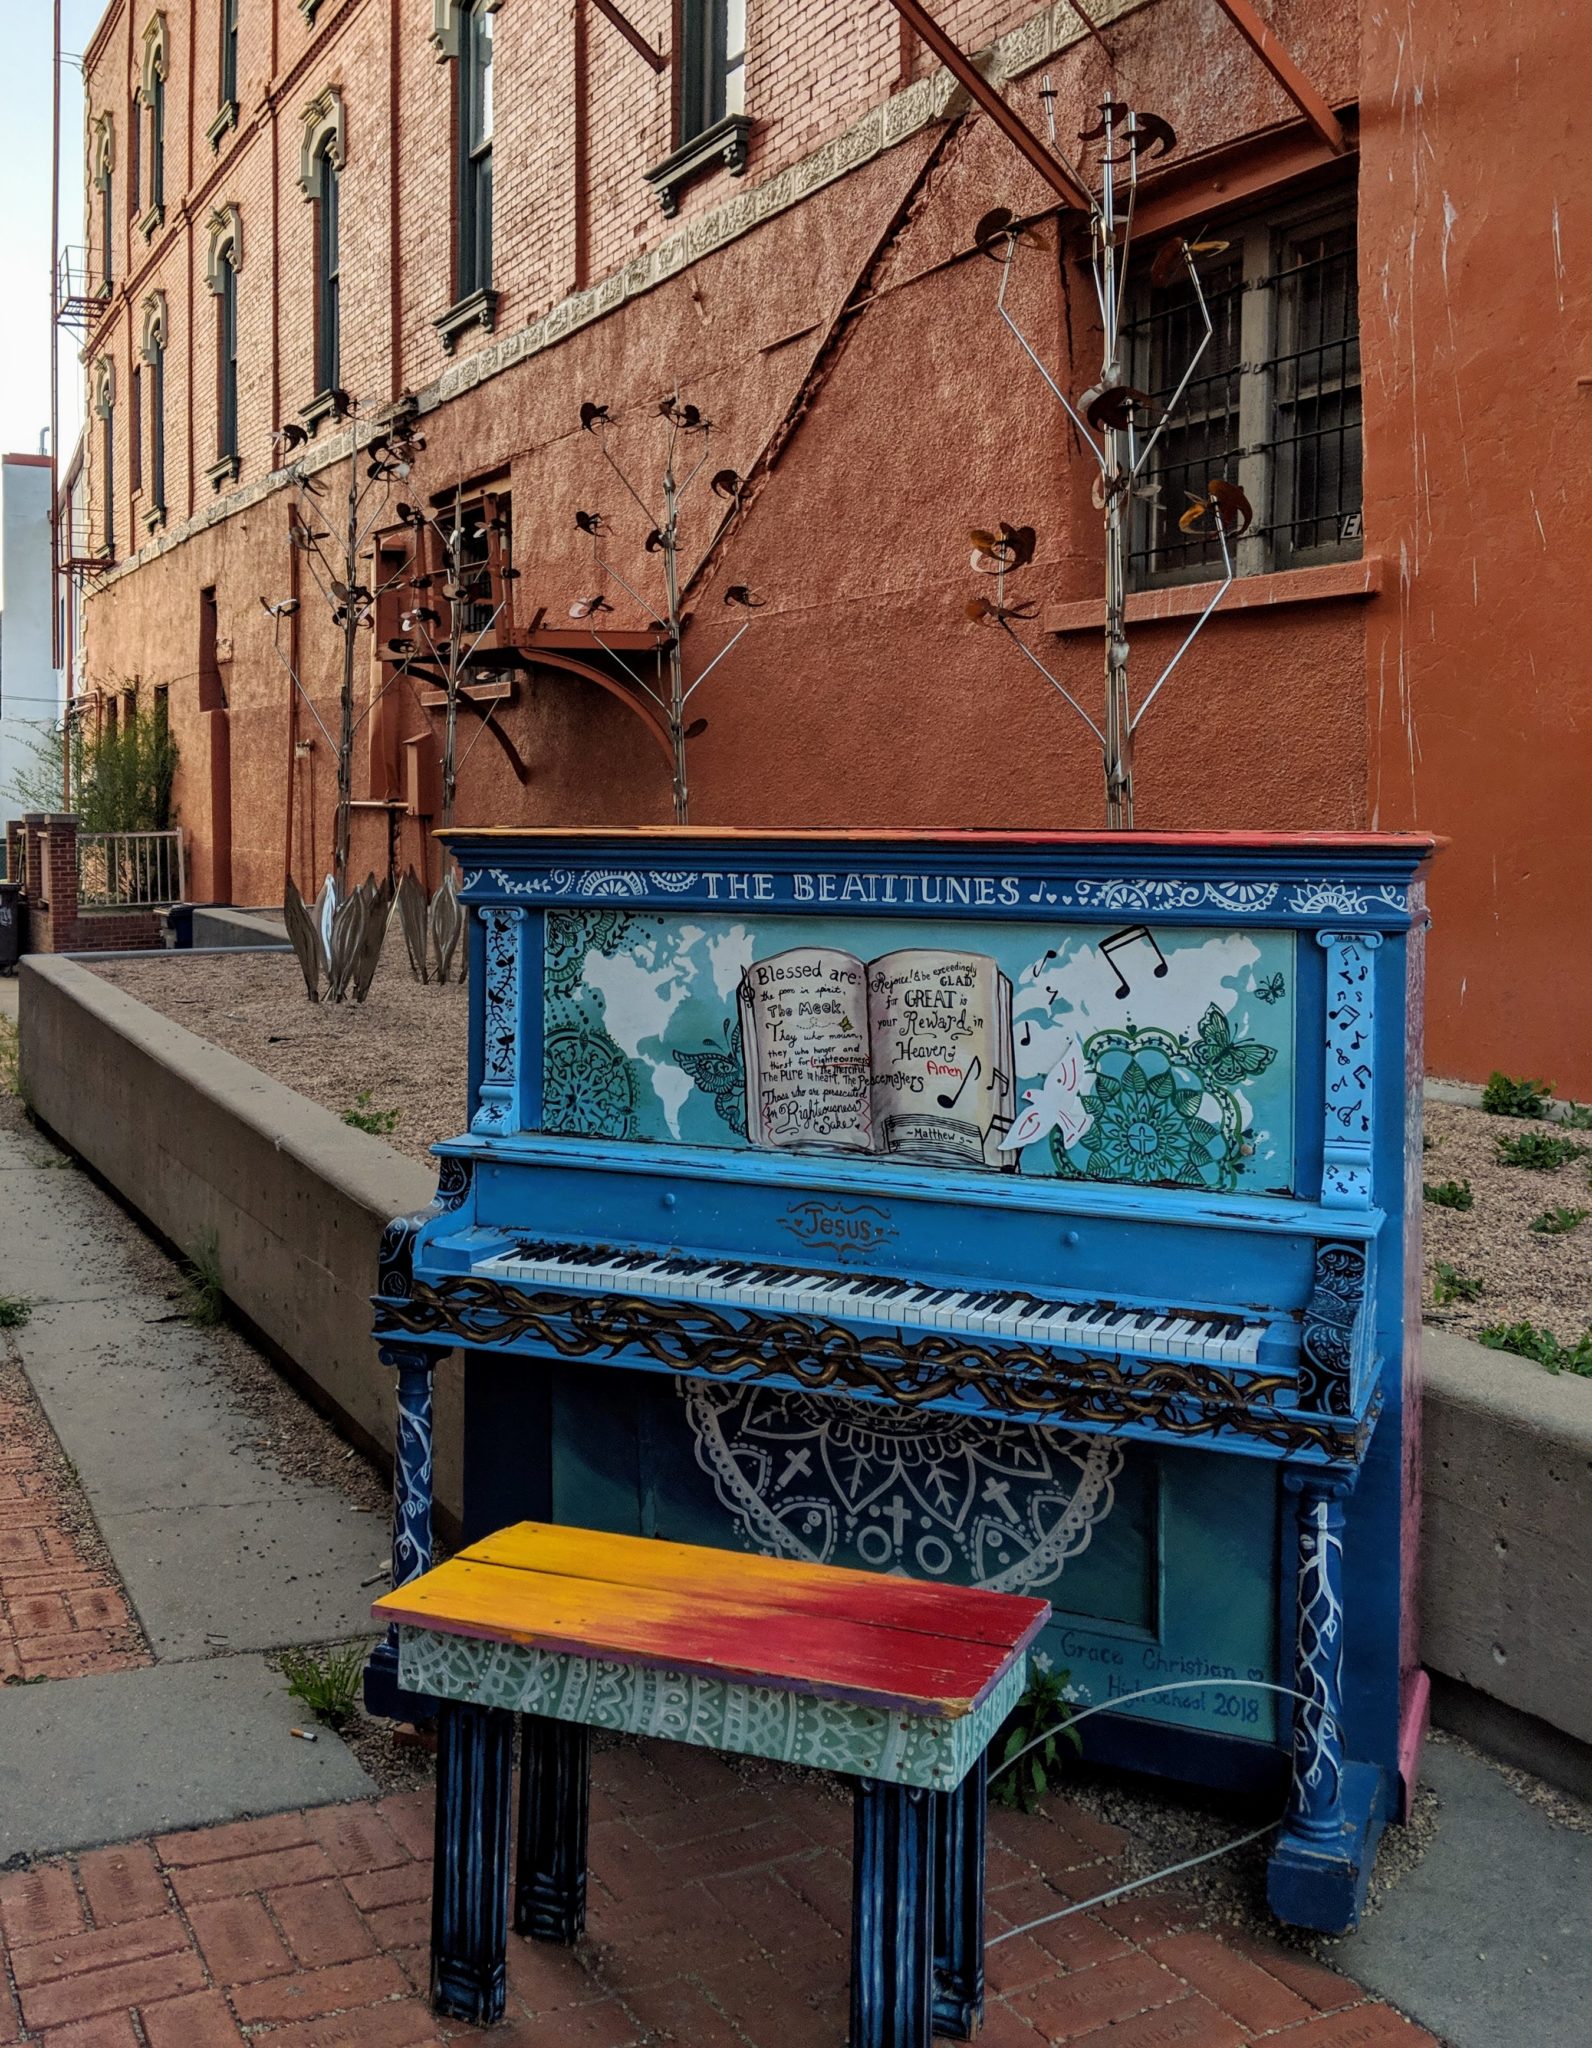 A painted and decorated piano in an alley.